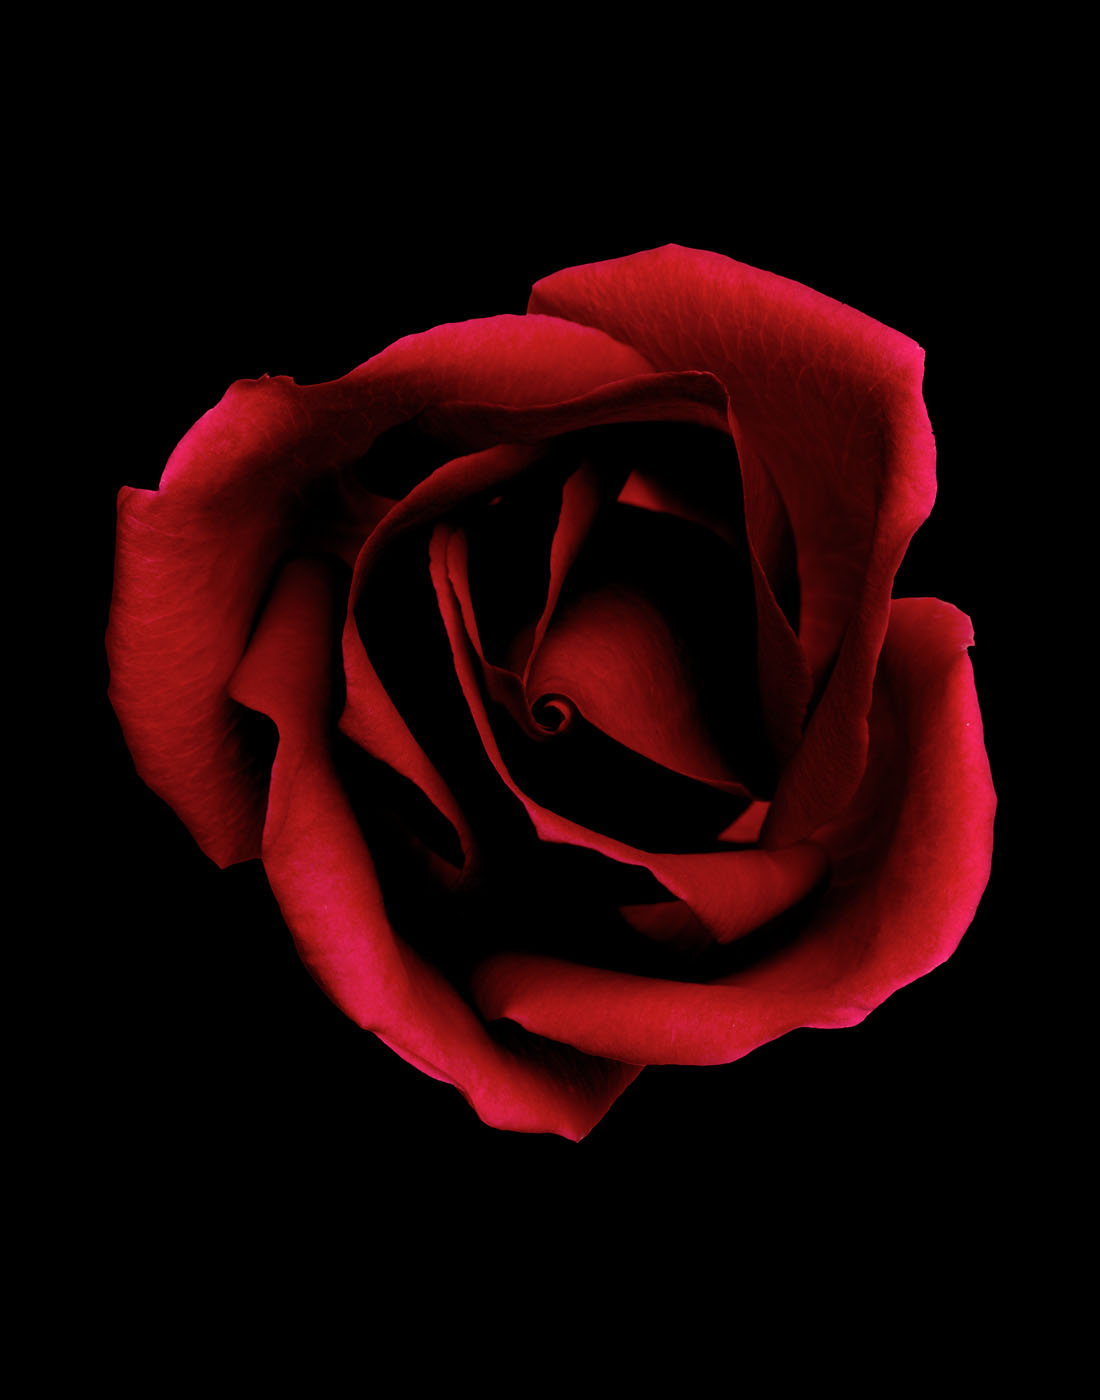 Red rose on black by Alexander Kent London based still life and product photographer.